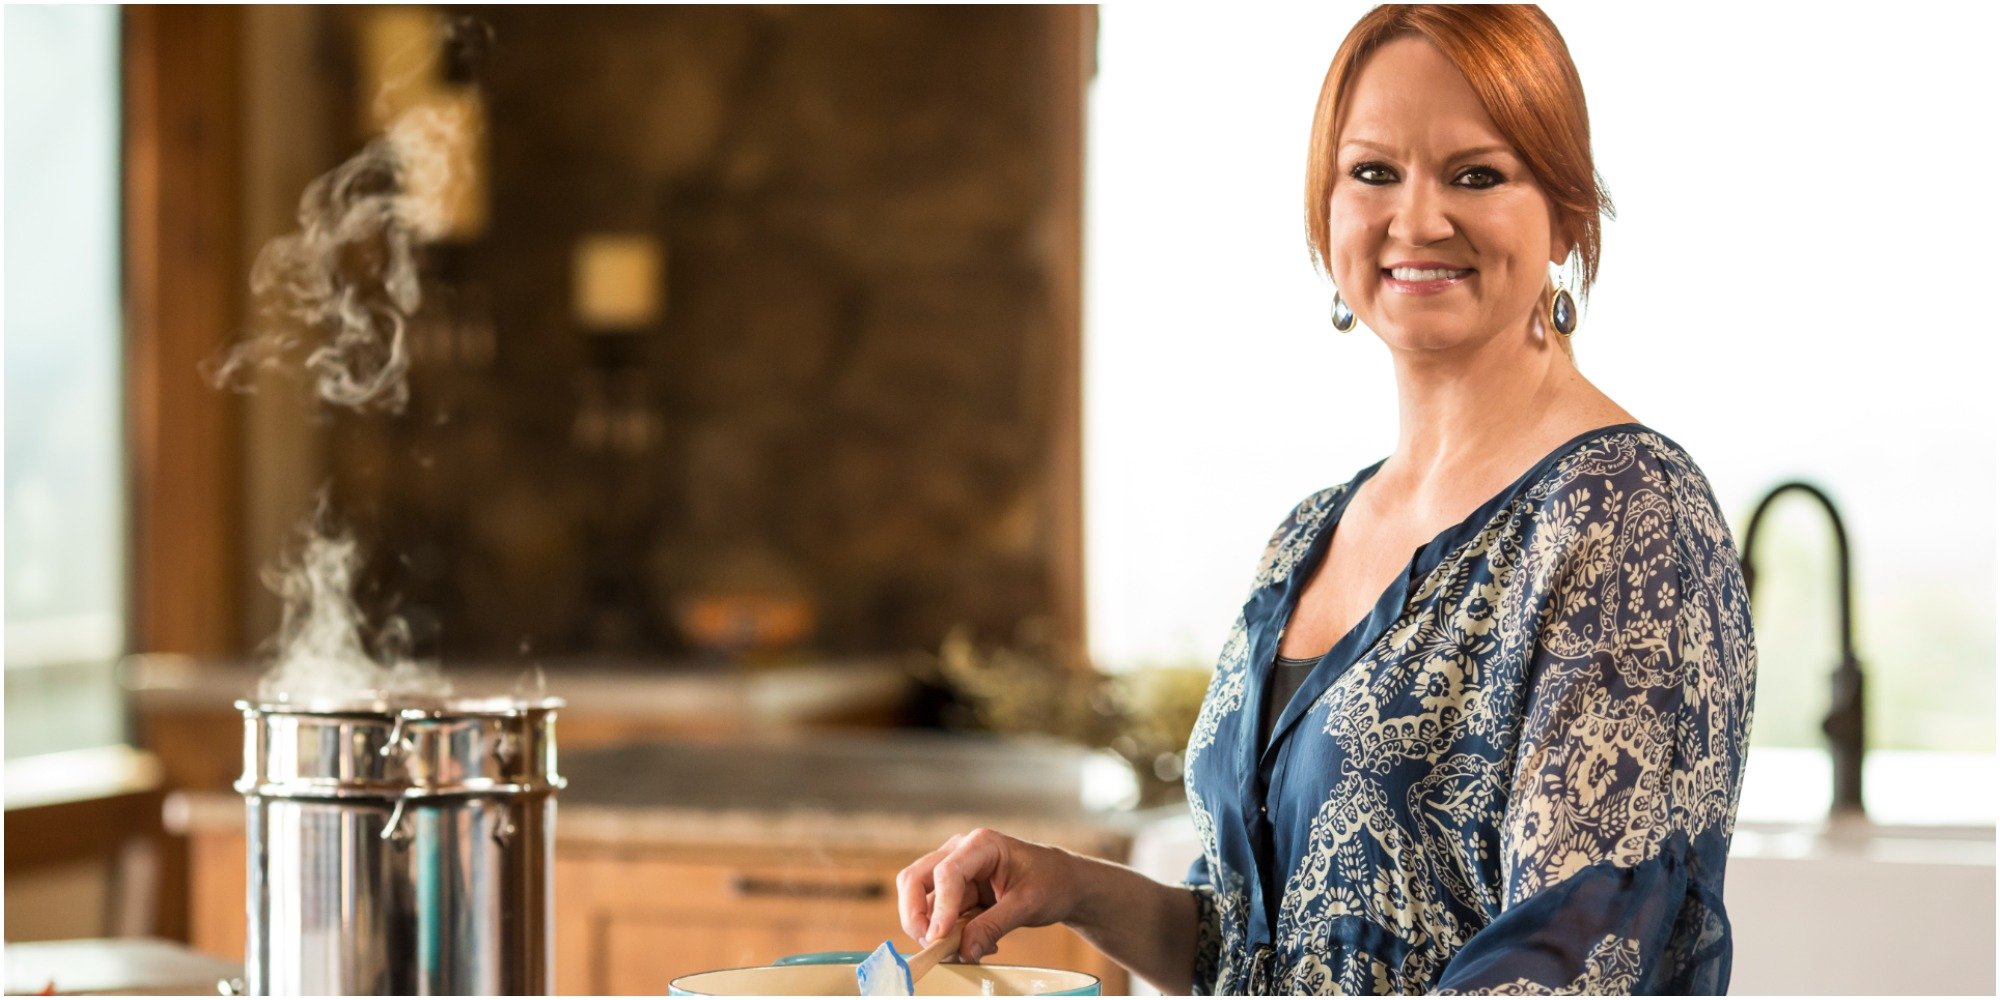 Ree Drummond in her kitchen at the lodge featured on "The Pioneer Woman" television show.